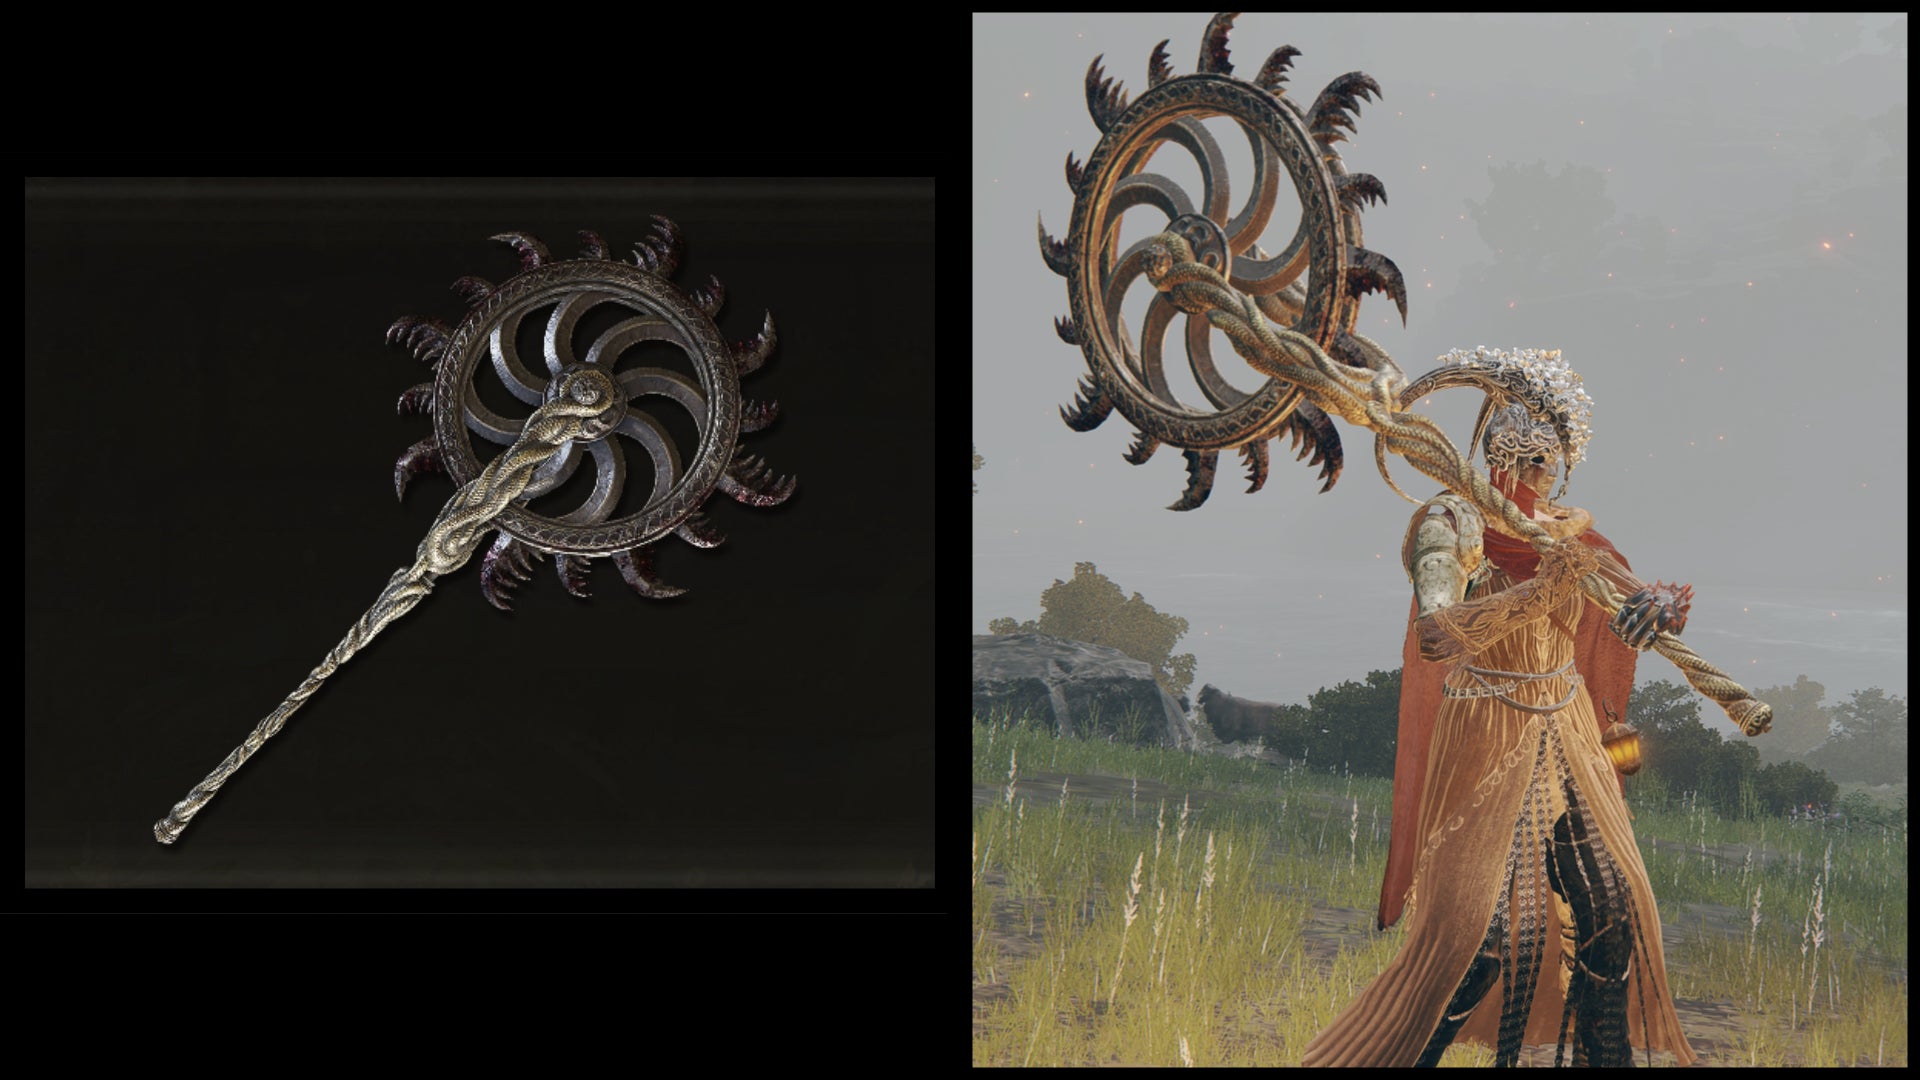 Left: an illustration of Ghiza's Wheel from Elden Ring. Right: the player character holding the same weapon against a Limgrave background.